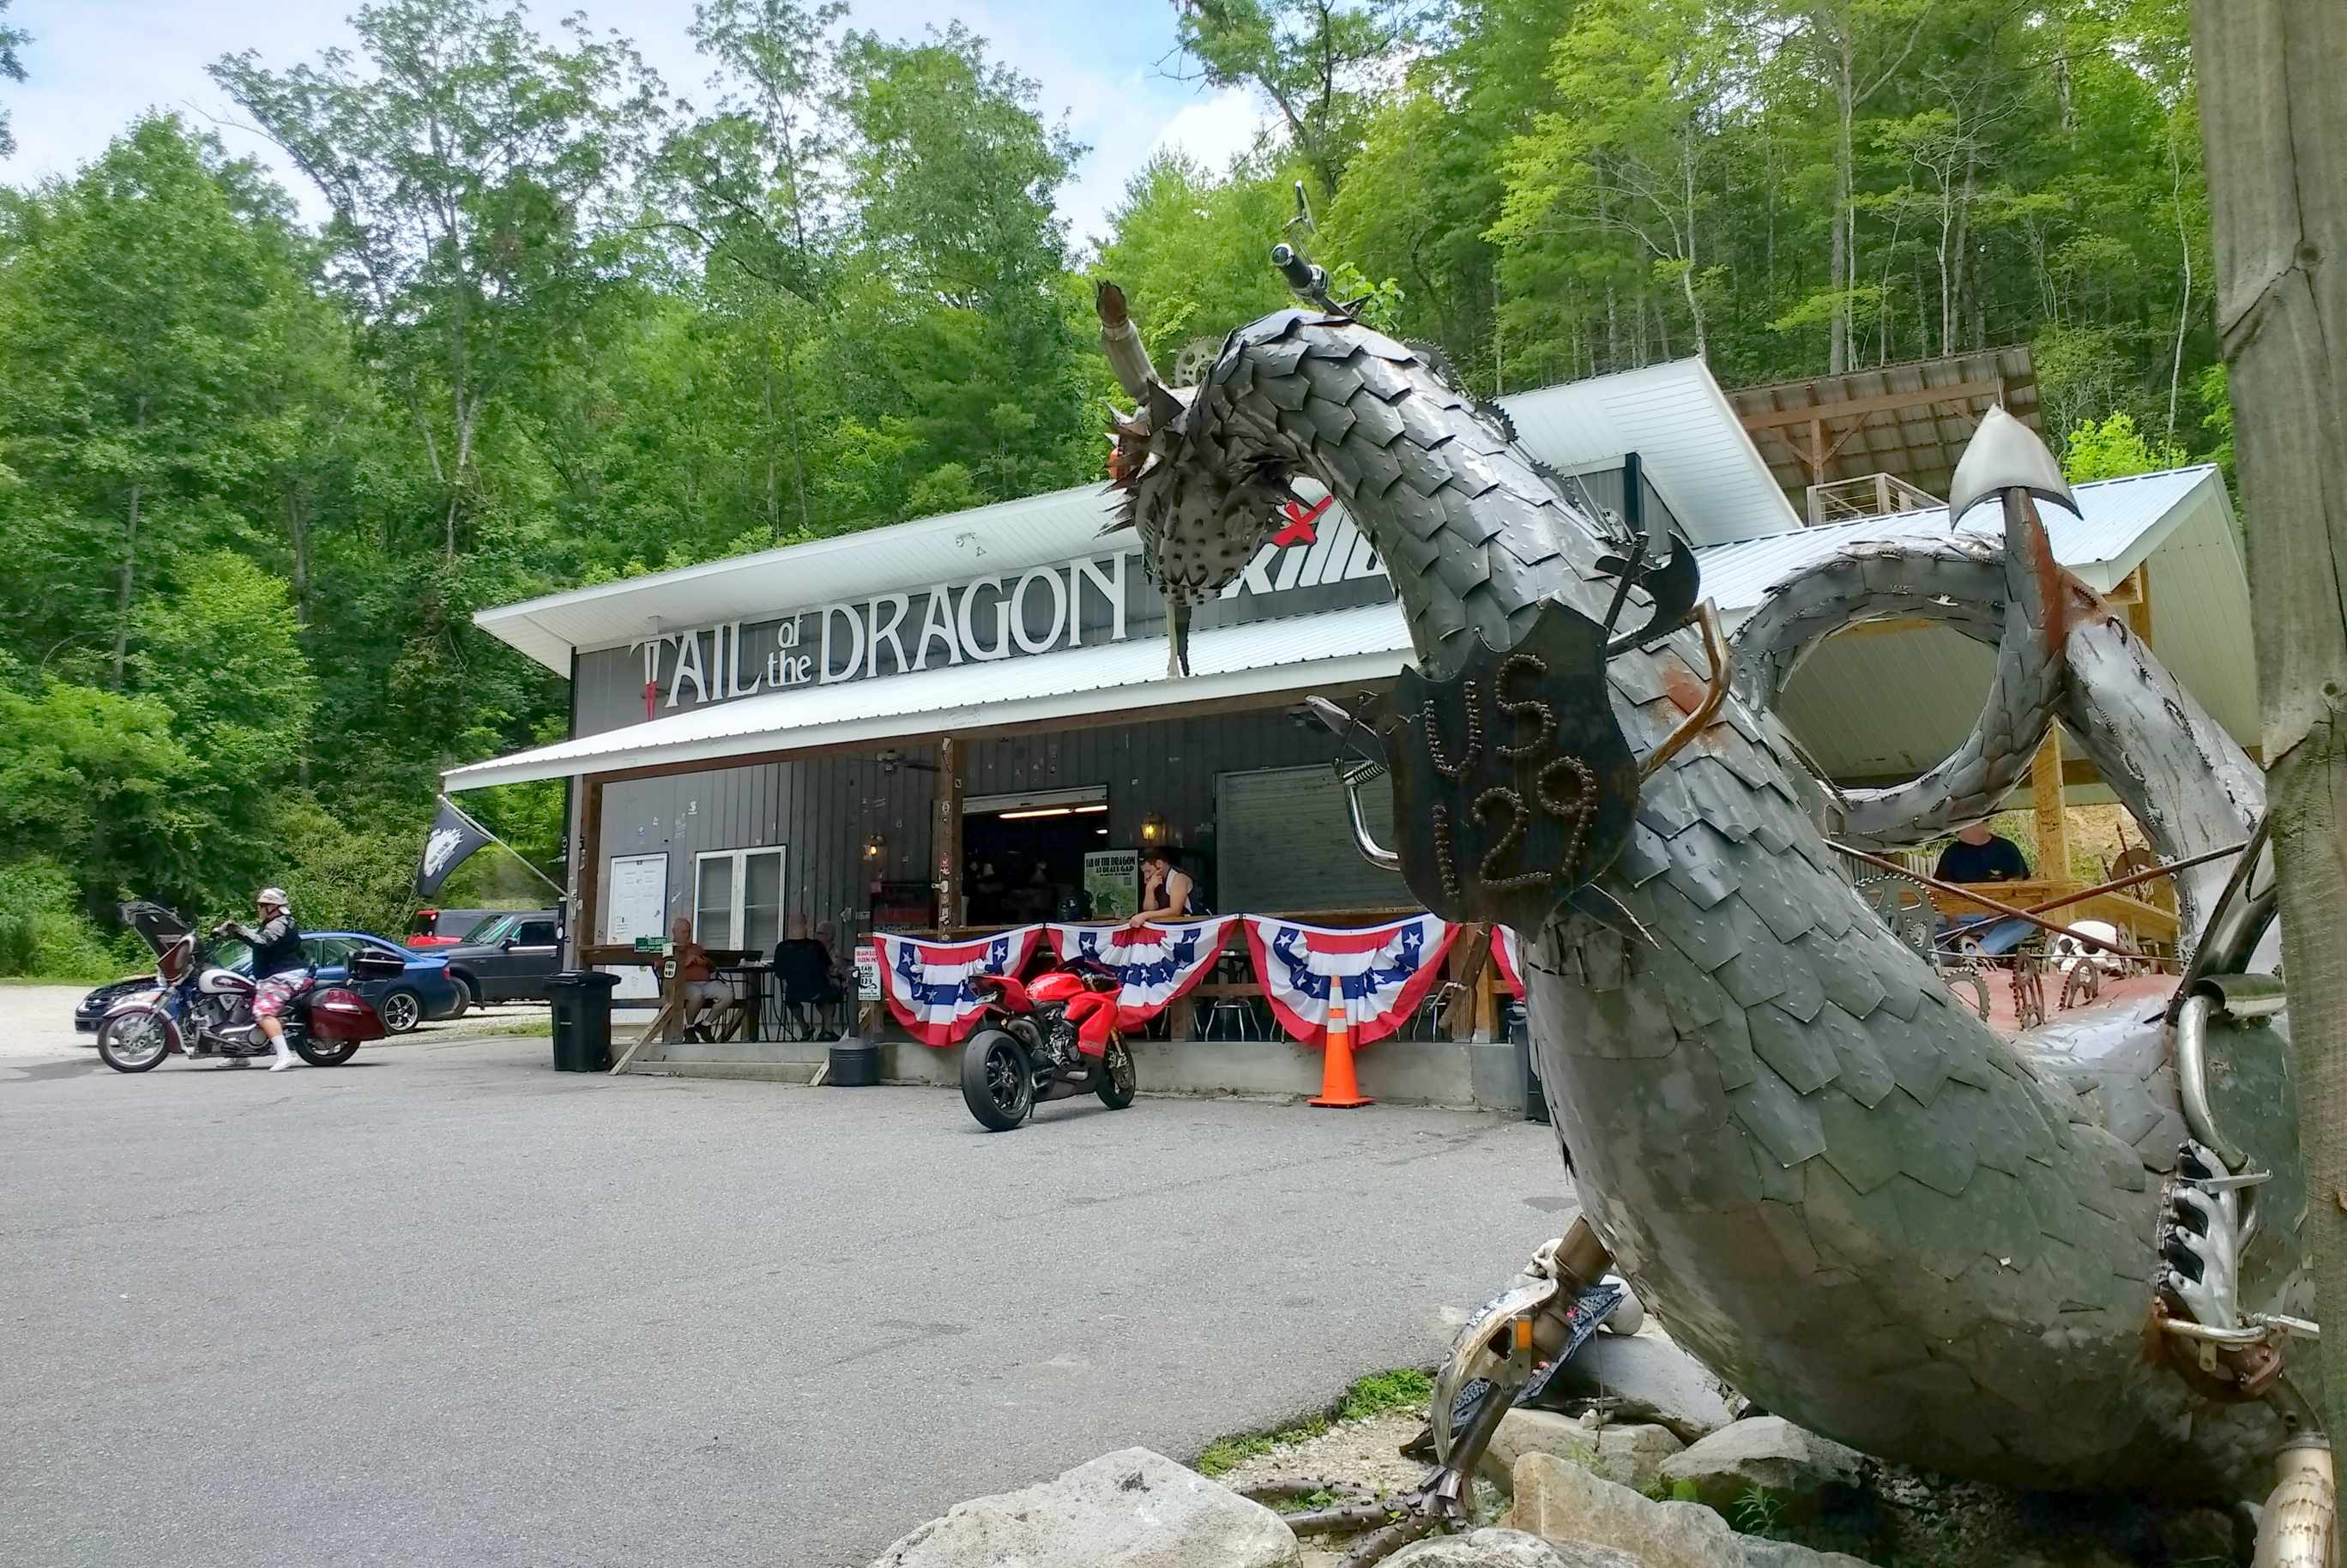 Riding U.S. Highway 129's Tail of the Dragon in Tennessee ...